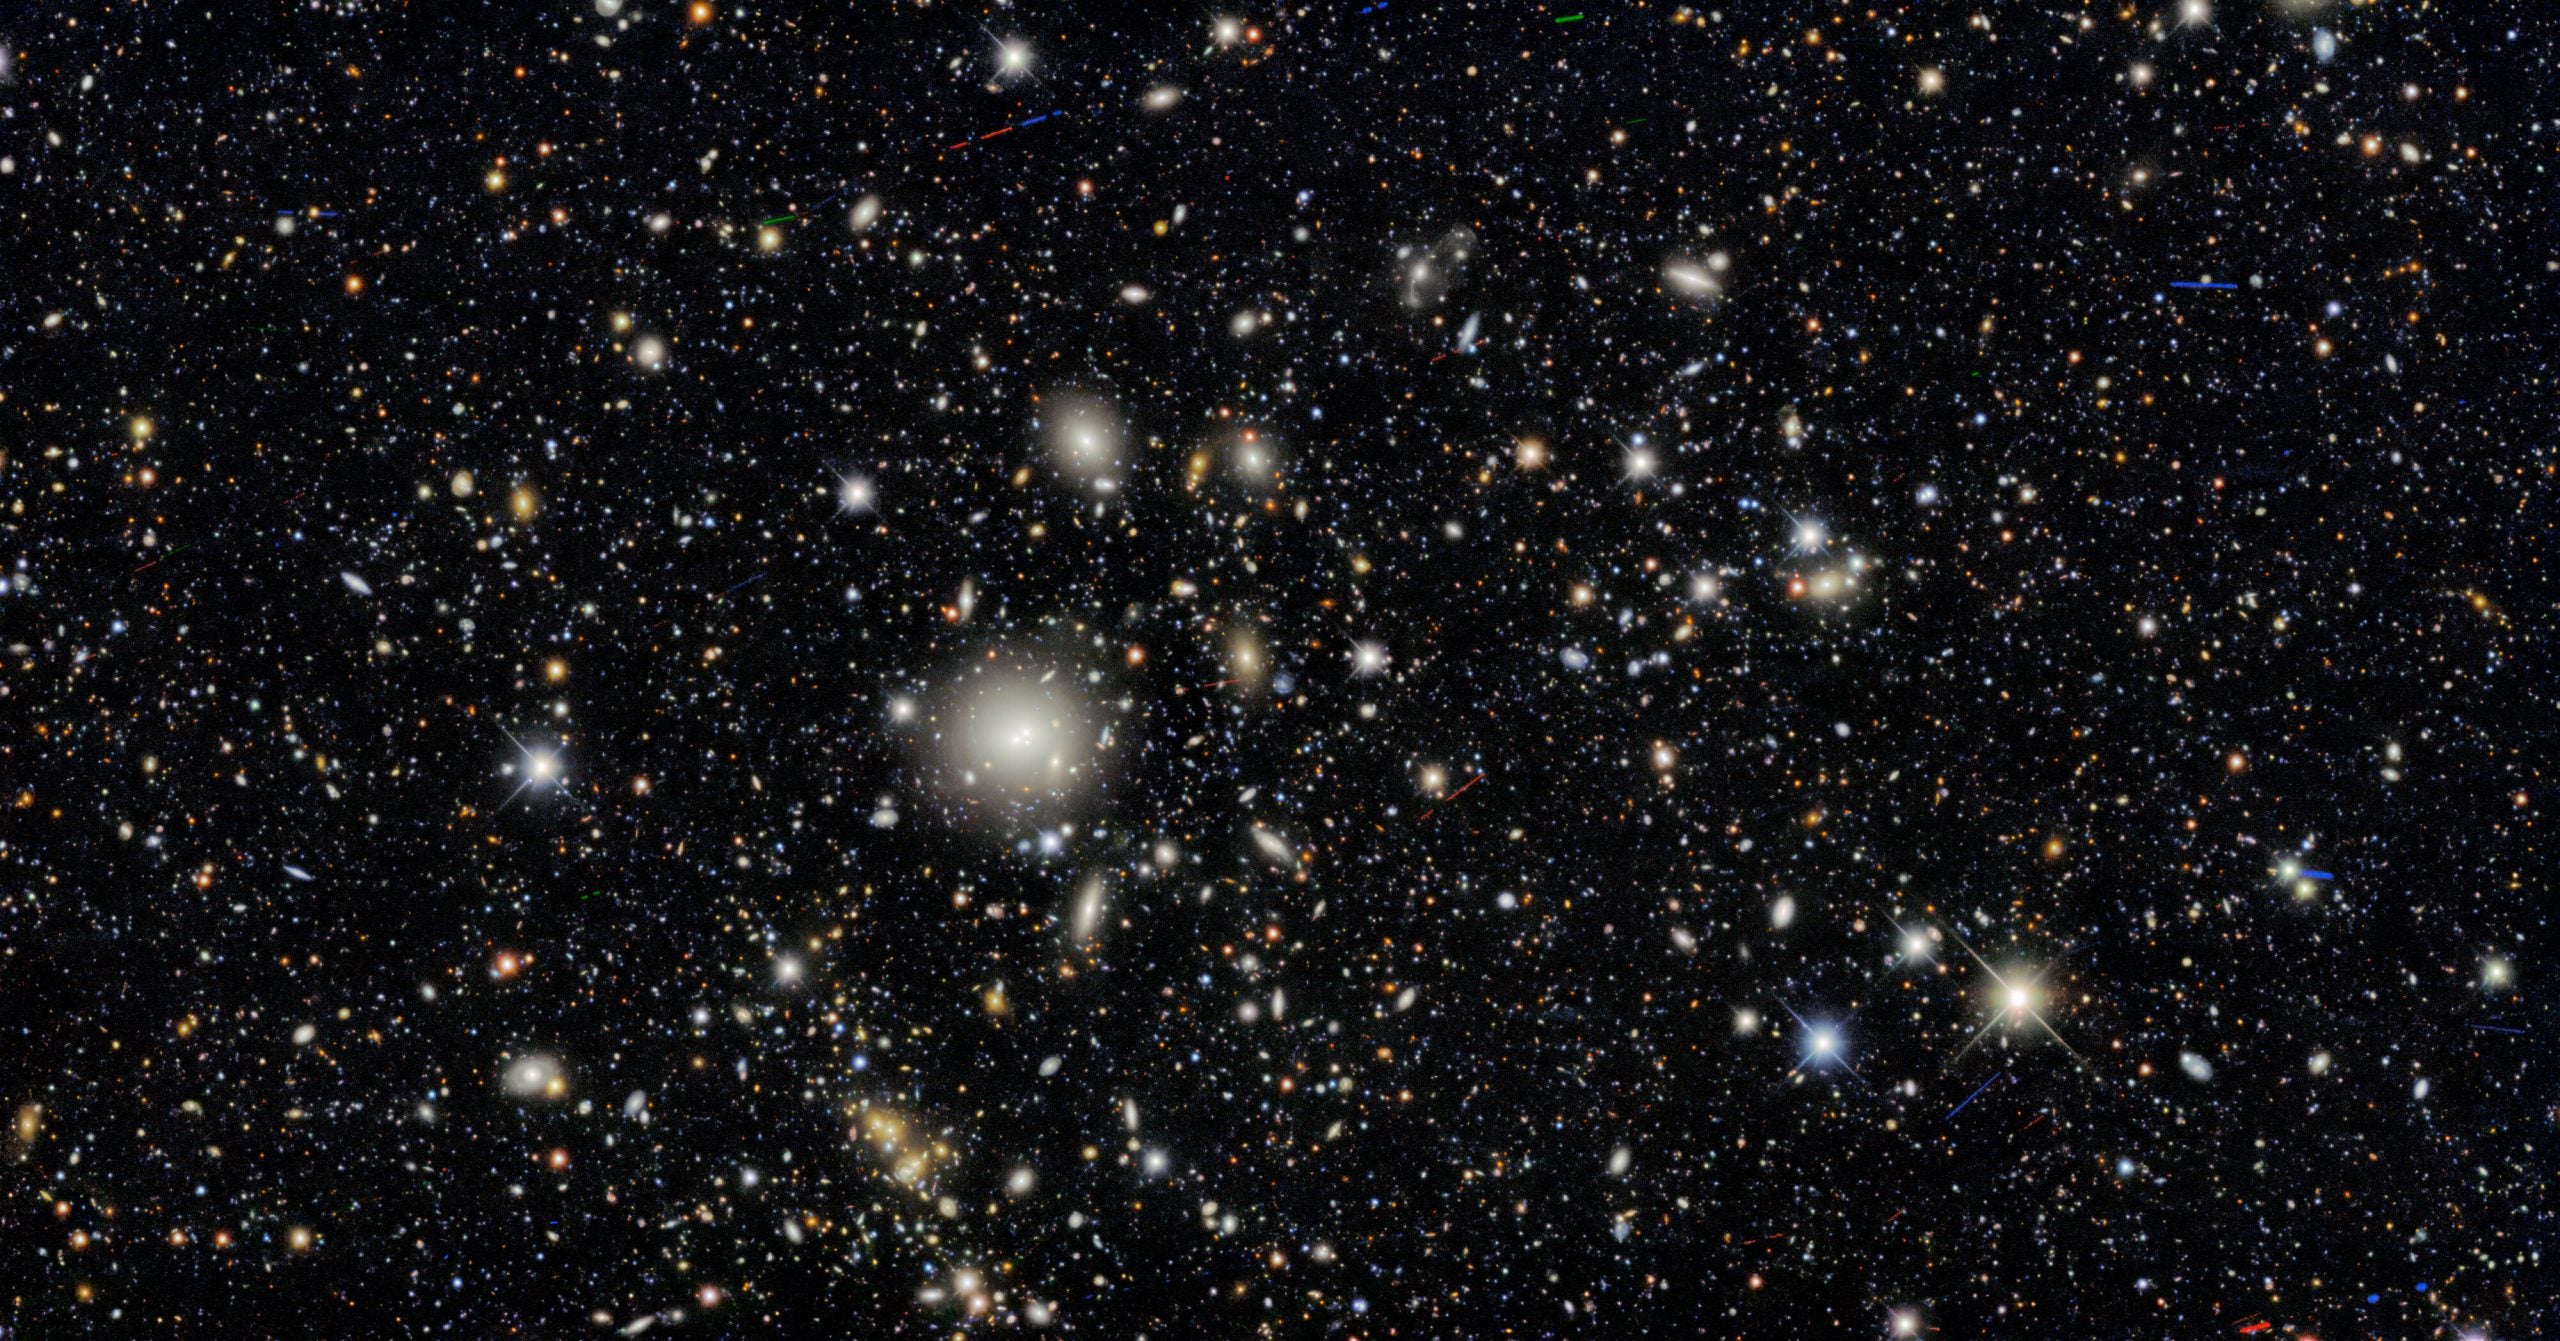 Nearly every light source in this deep field image is a galaxy.  (Image: Dark Energy Survey/DOE/FNAL/DECam/CTIO/NOIRLab/NSF/AURA; Acknowledgments: T.A. Rector (University of Alaska Anchorage/NSF’s NOIRLab), M. Zamani (NSF’s NOIRLab) and D. de Martin (NSF’s NOIRLab)